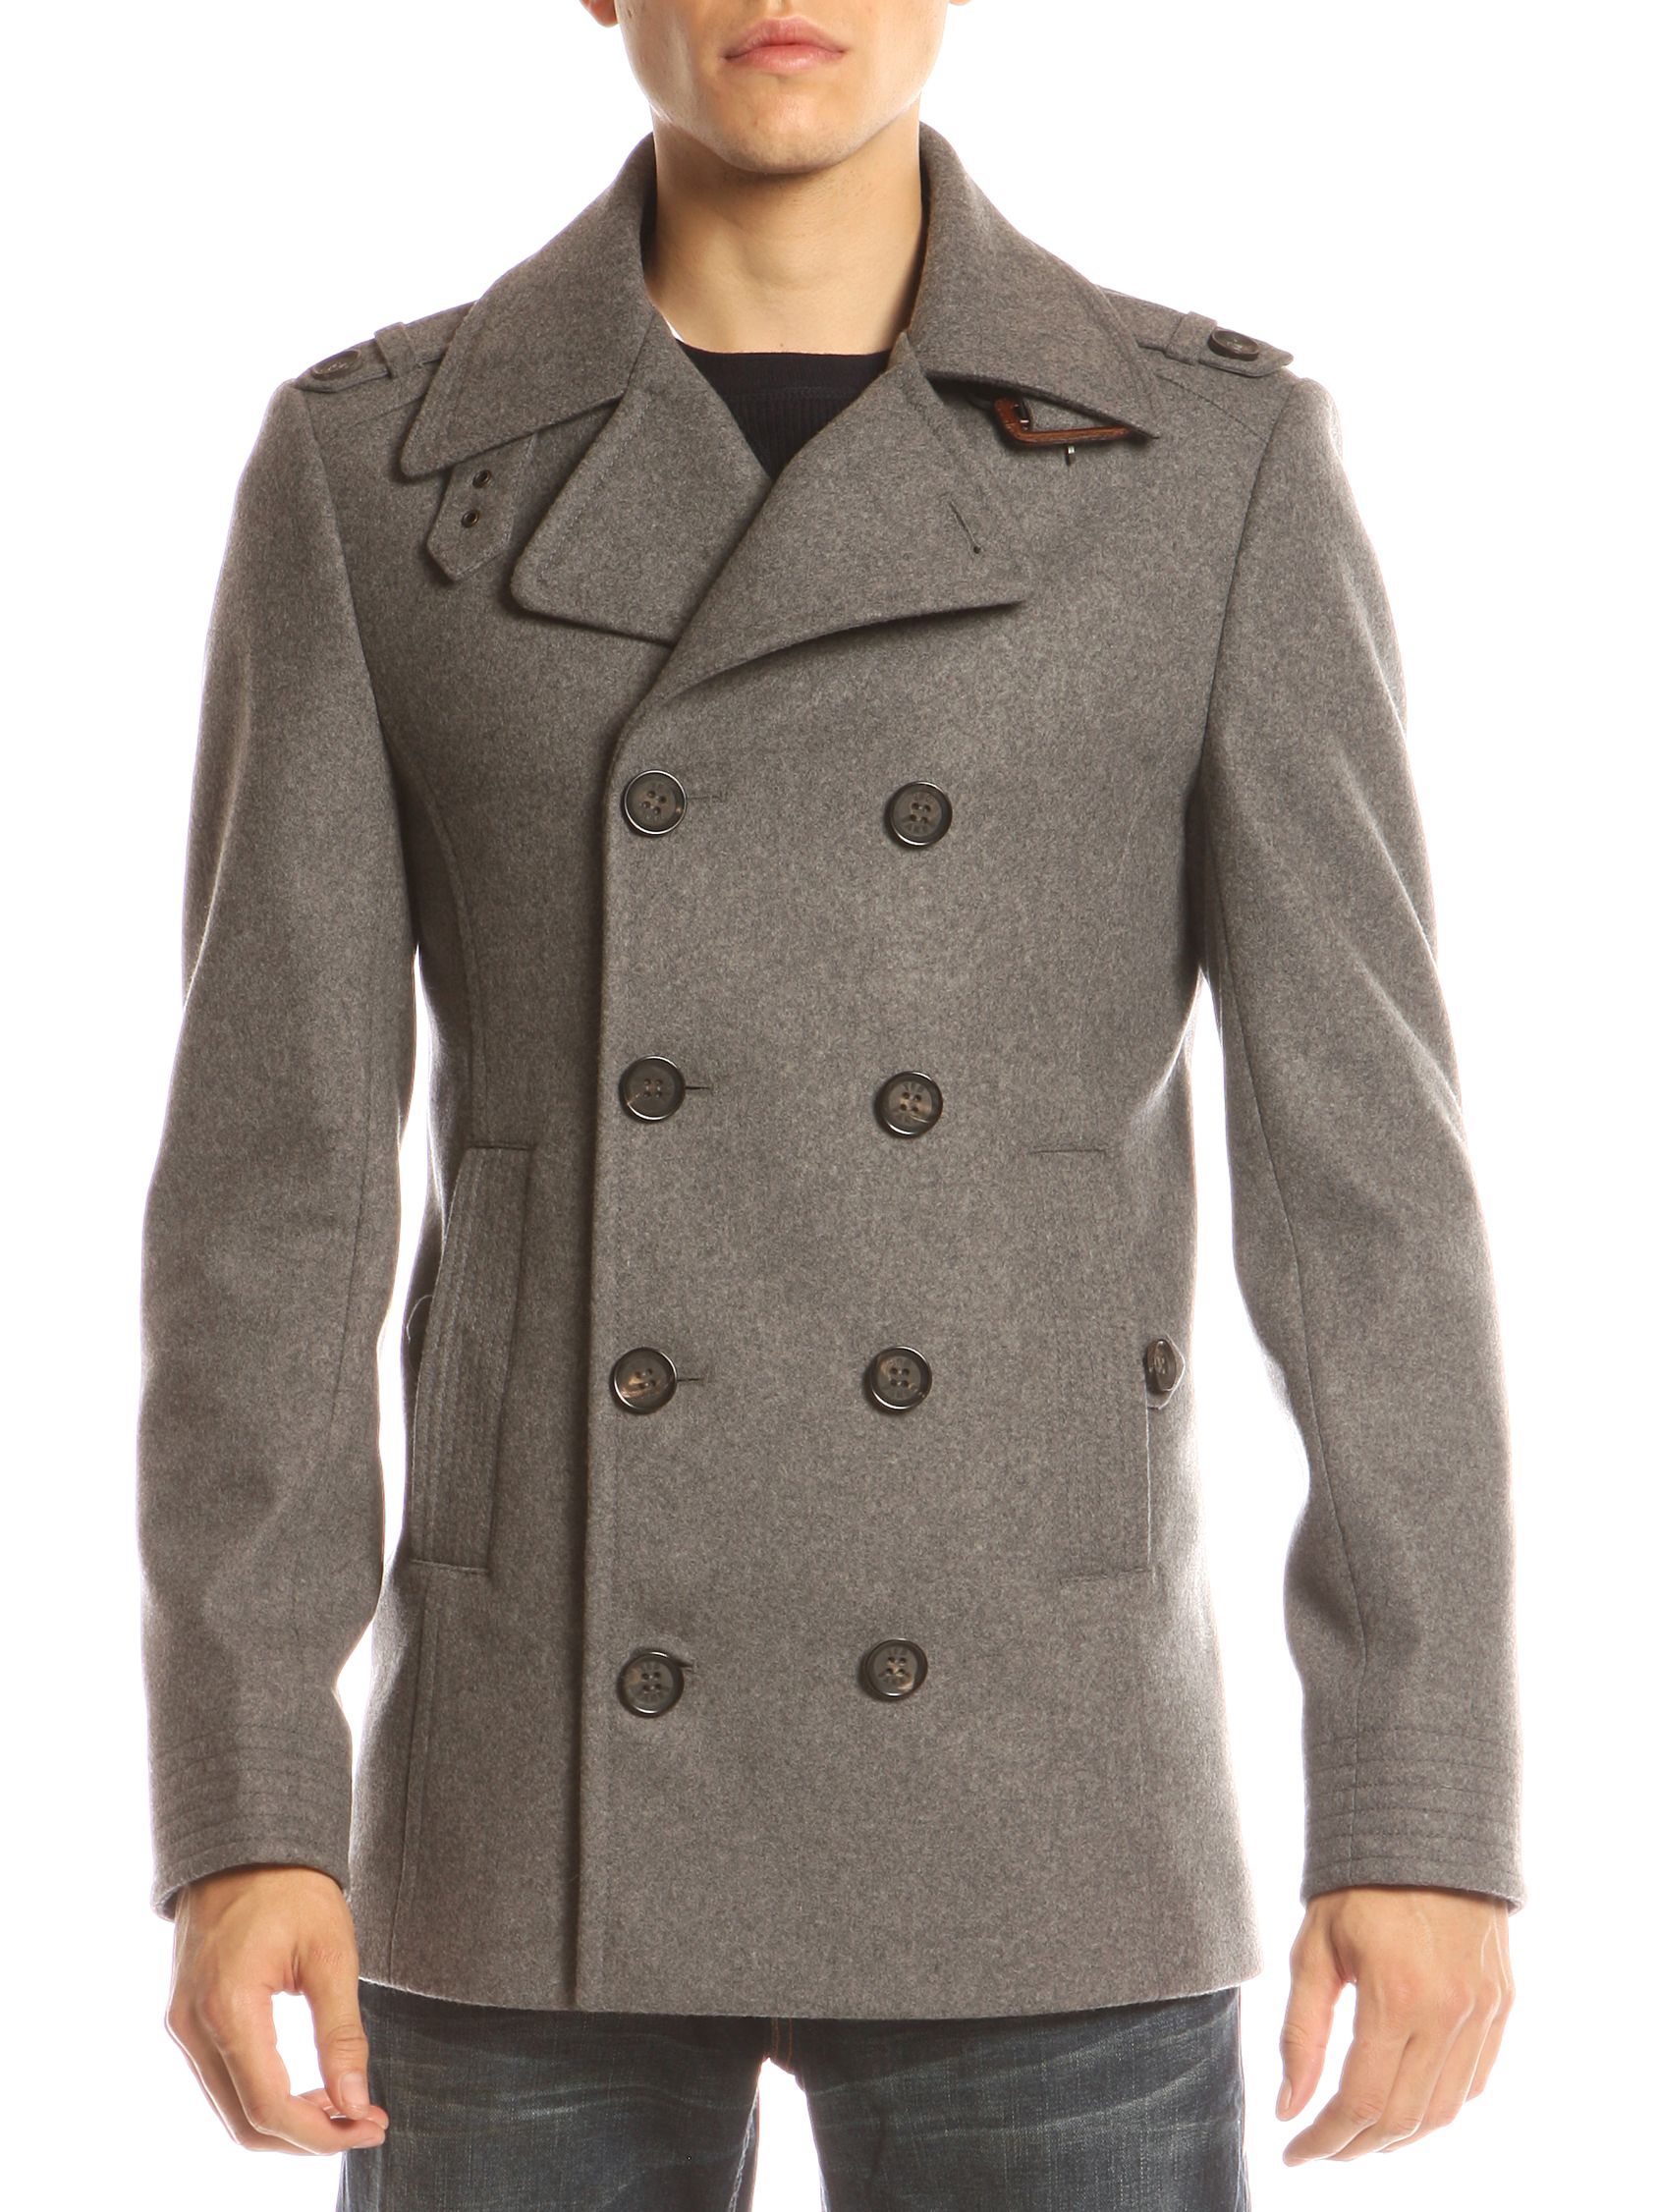 Ted Baker Loman Double Wool Reefer Jacket, Grey at John Lewis